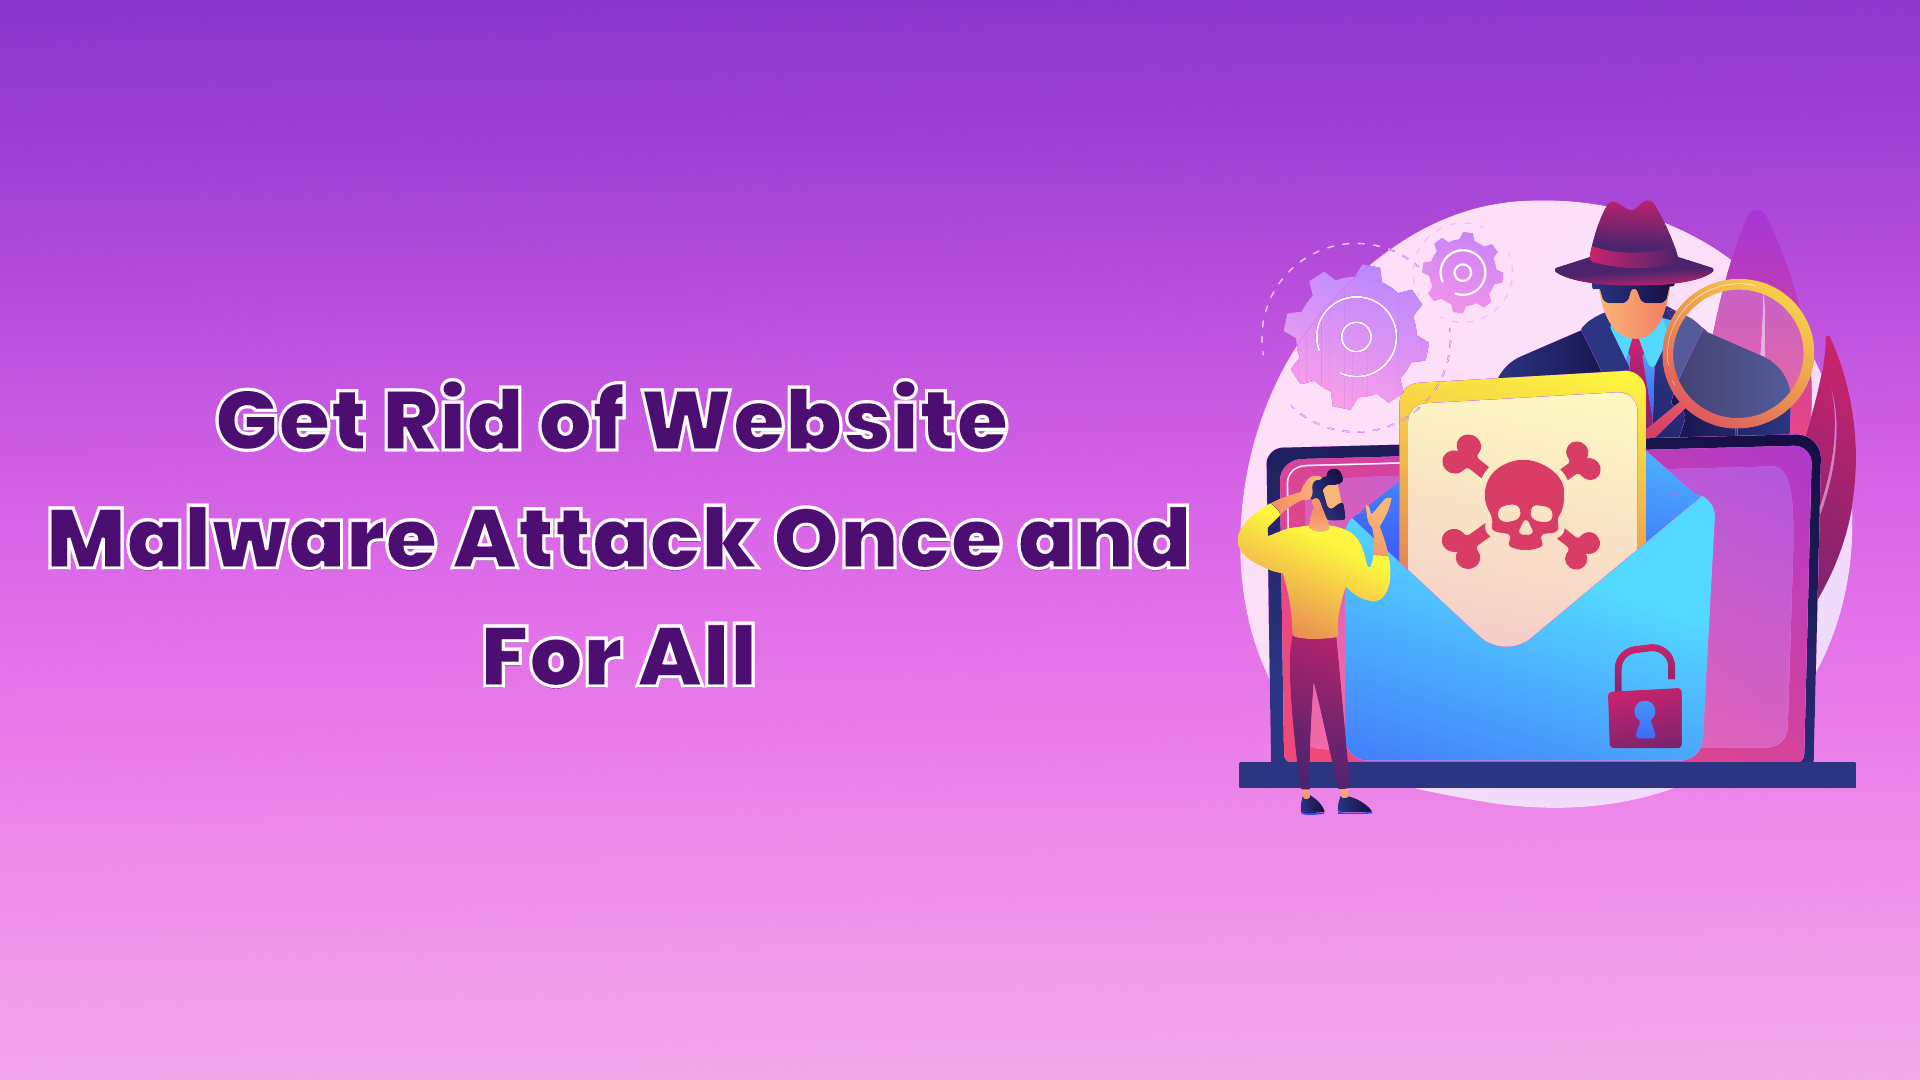 Get Rid of Website Malware Attack Once and For All